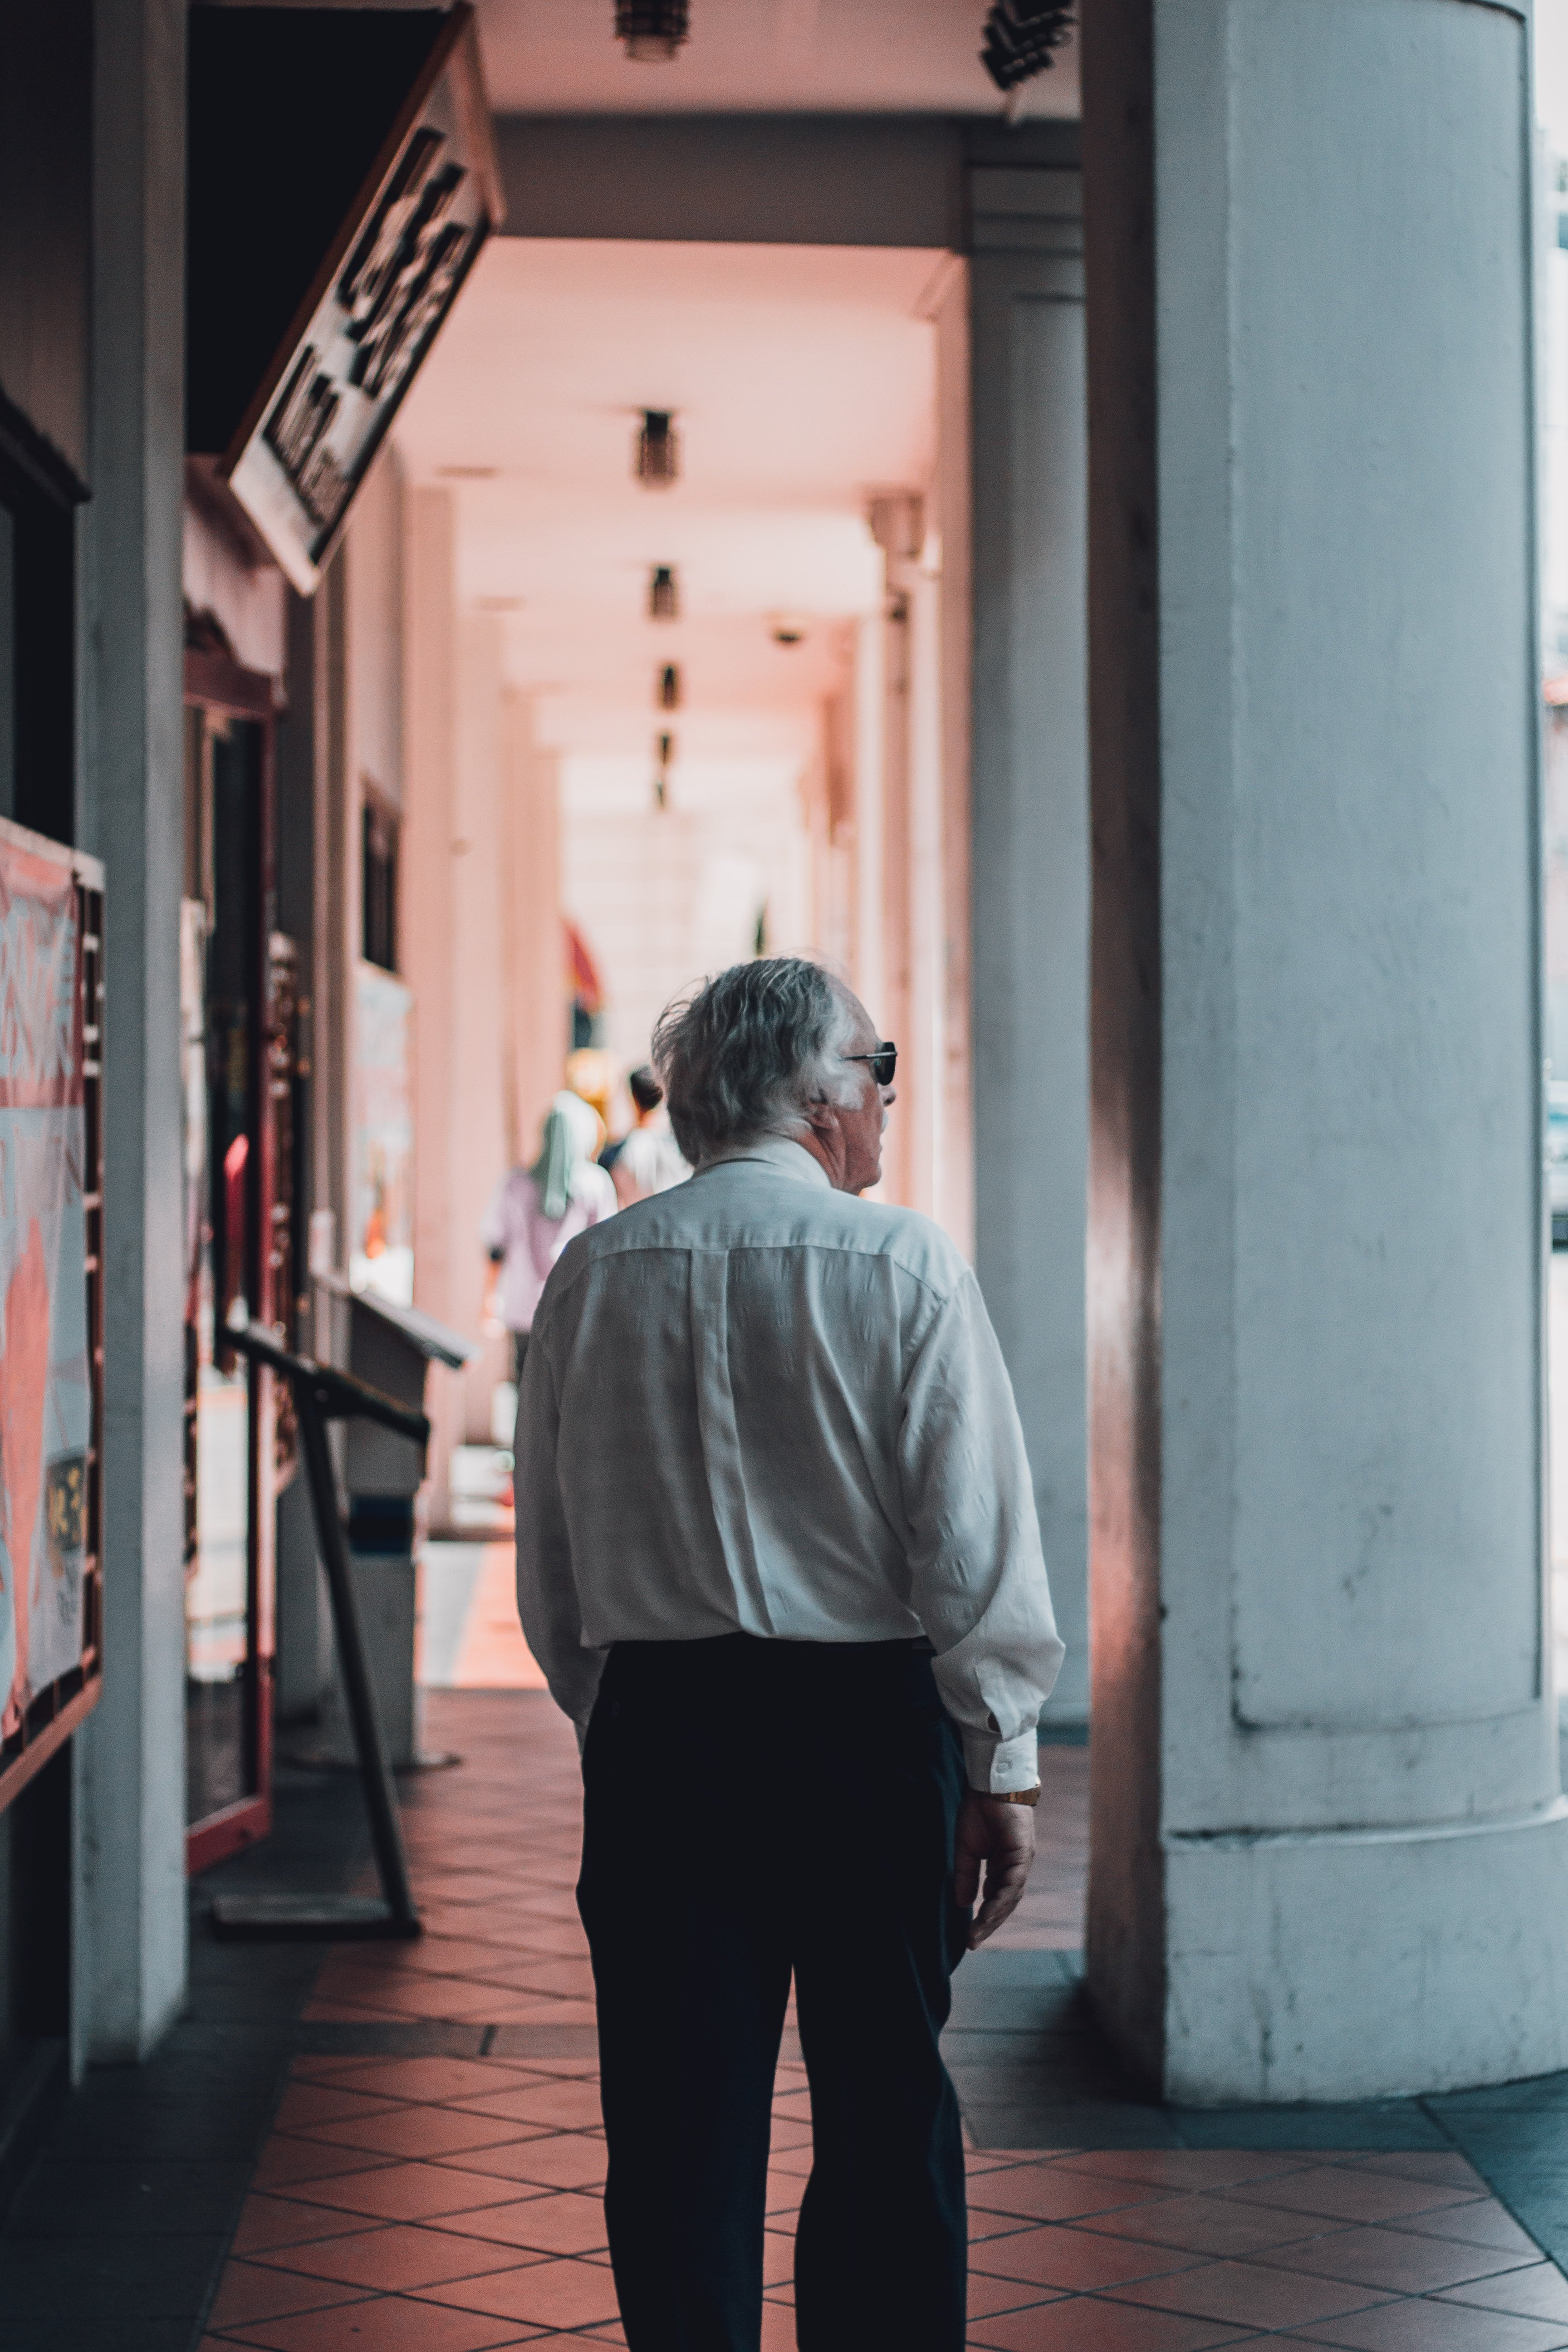 Old man walking through college corridors  | Photo by Lily Banse on Unsplash